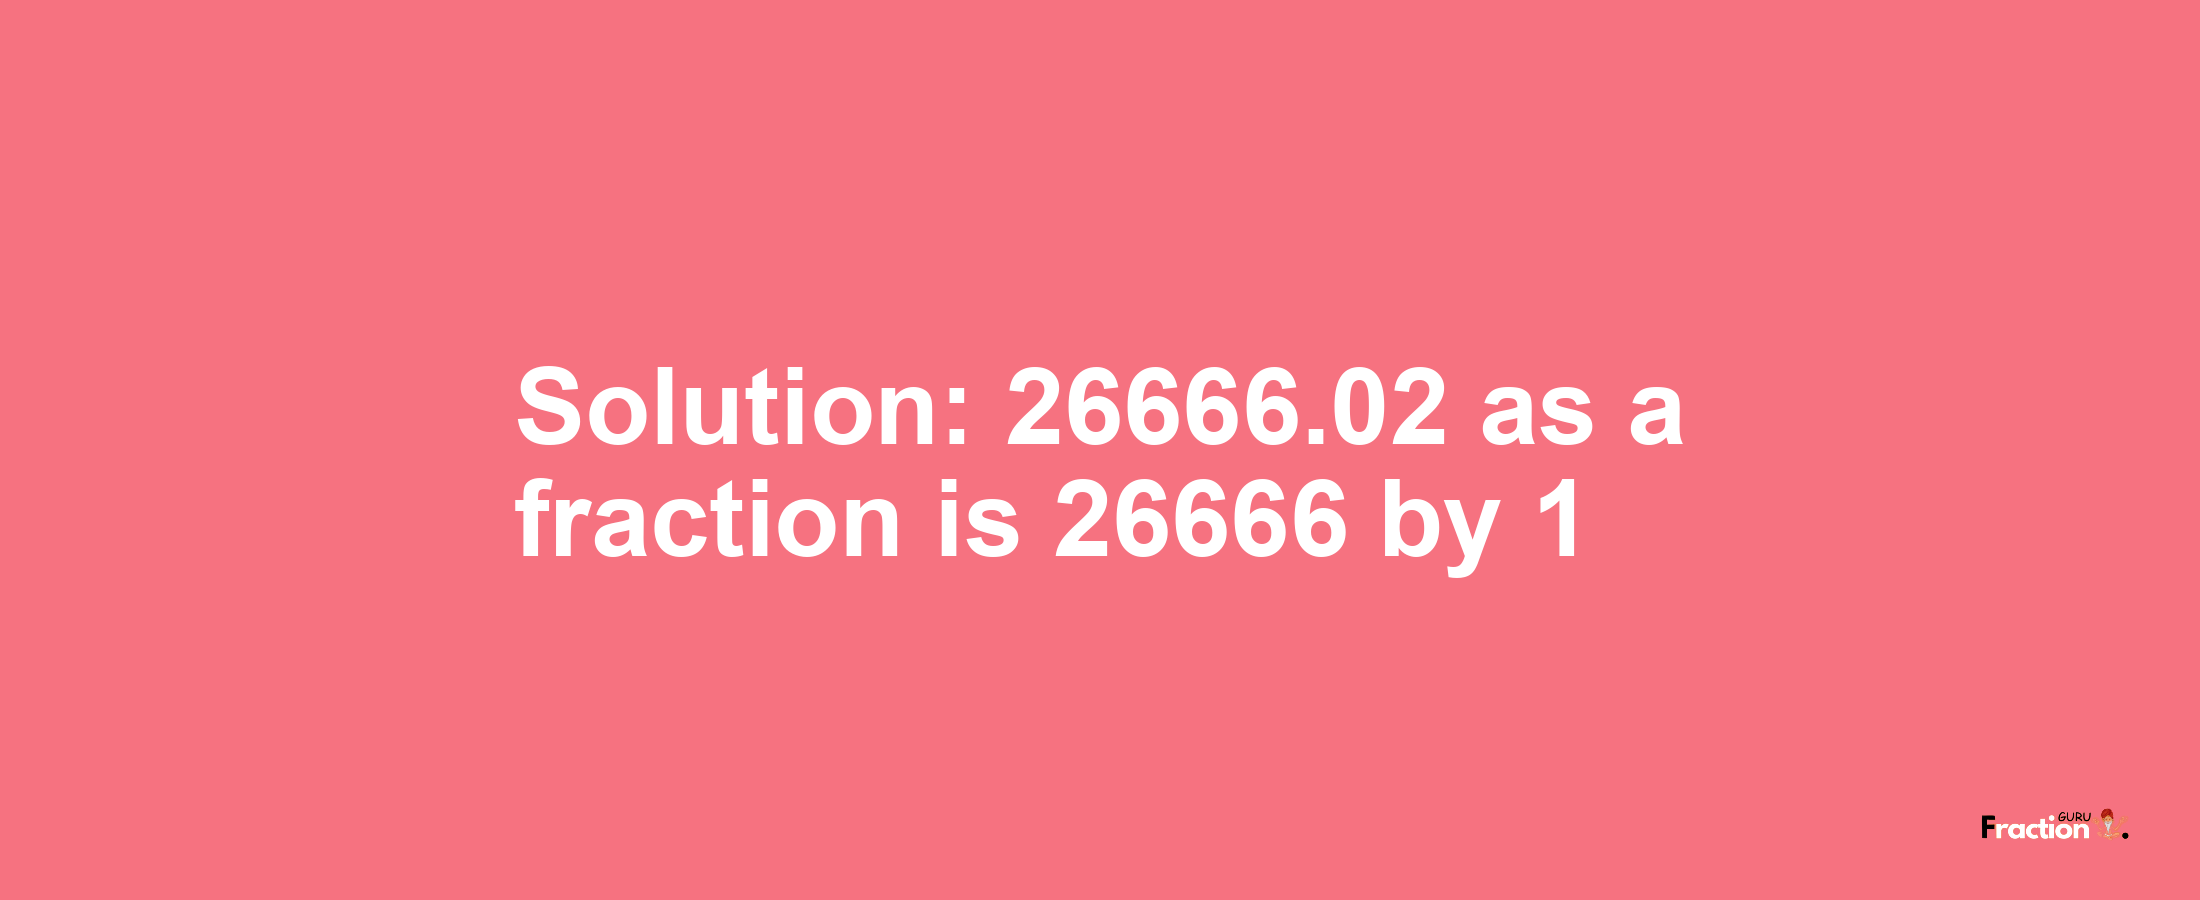 Solution:26666.02 as a fraction is 26666/1